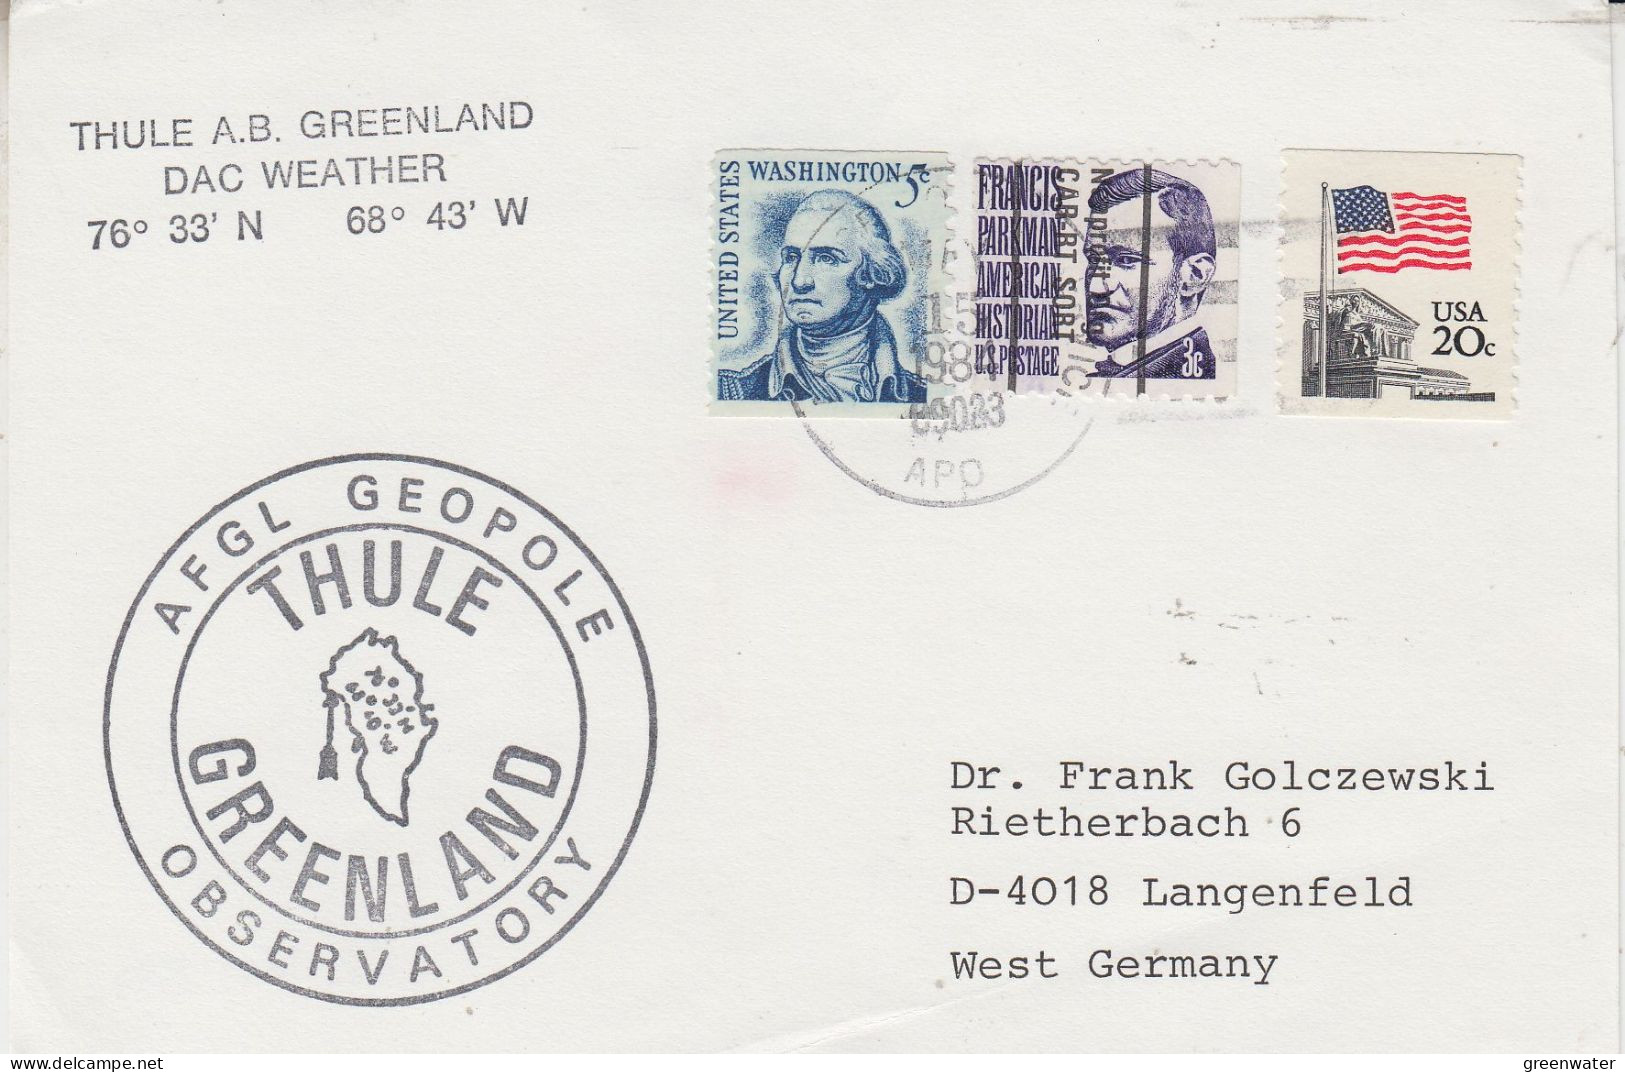 USA AFGL Geopole Observatory Thule Greenland Ca MAY 15 1984 (SD200) - Programmes Scientifiques